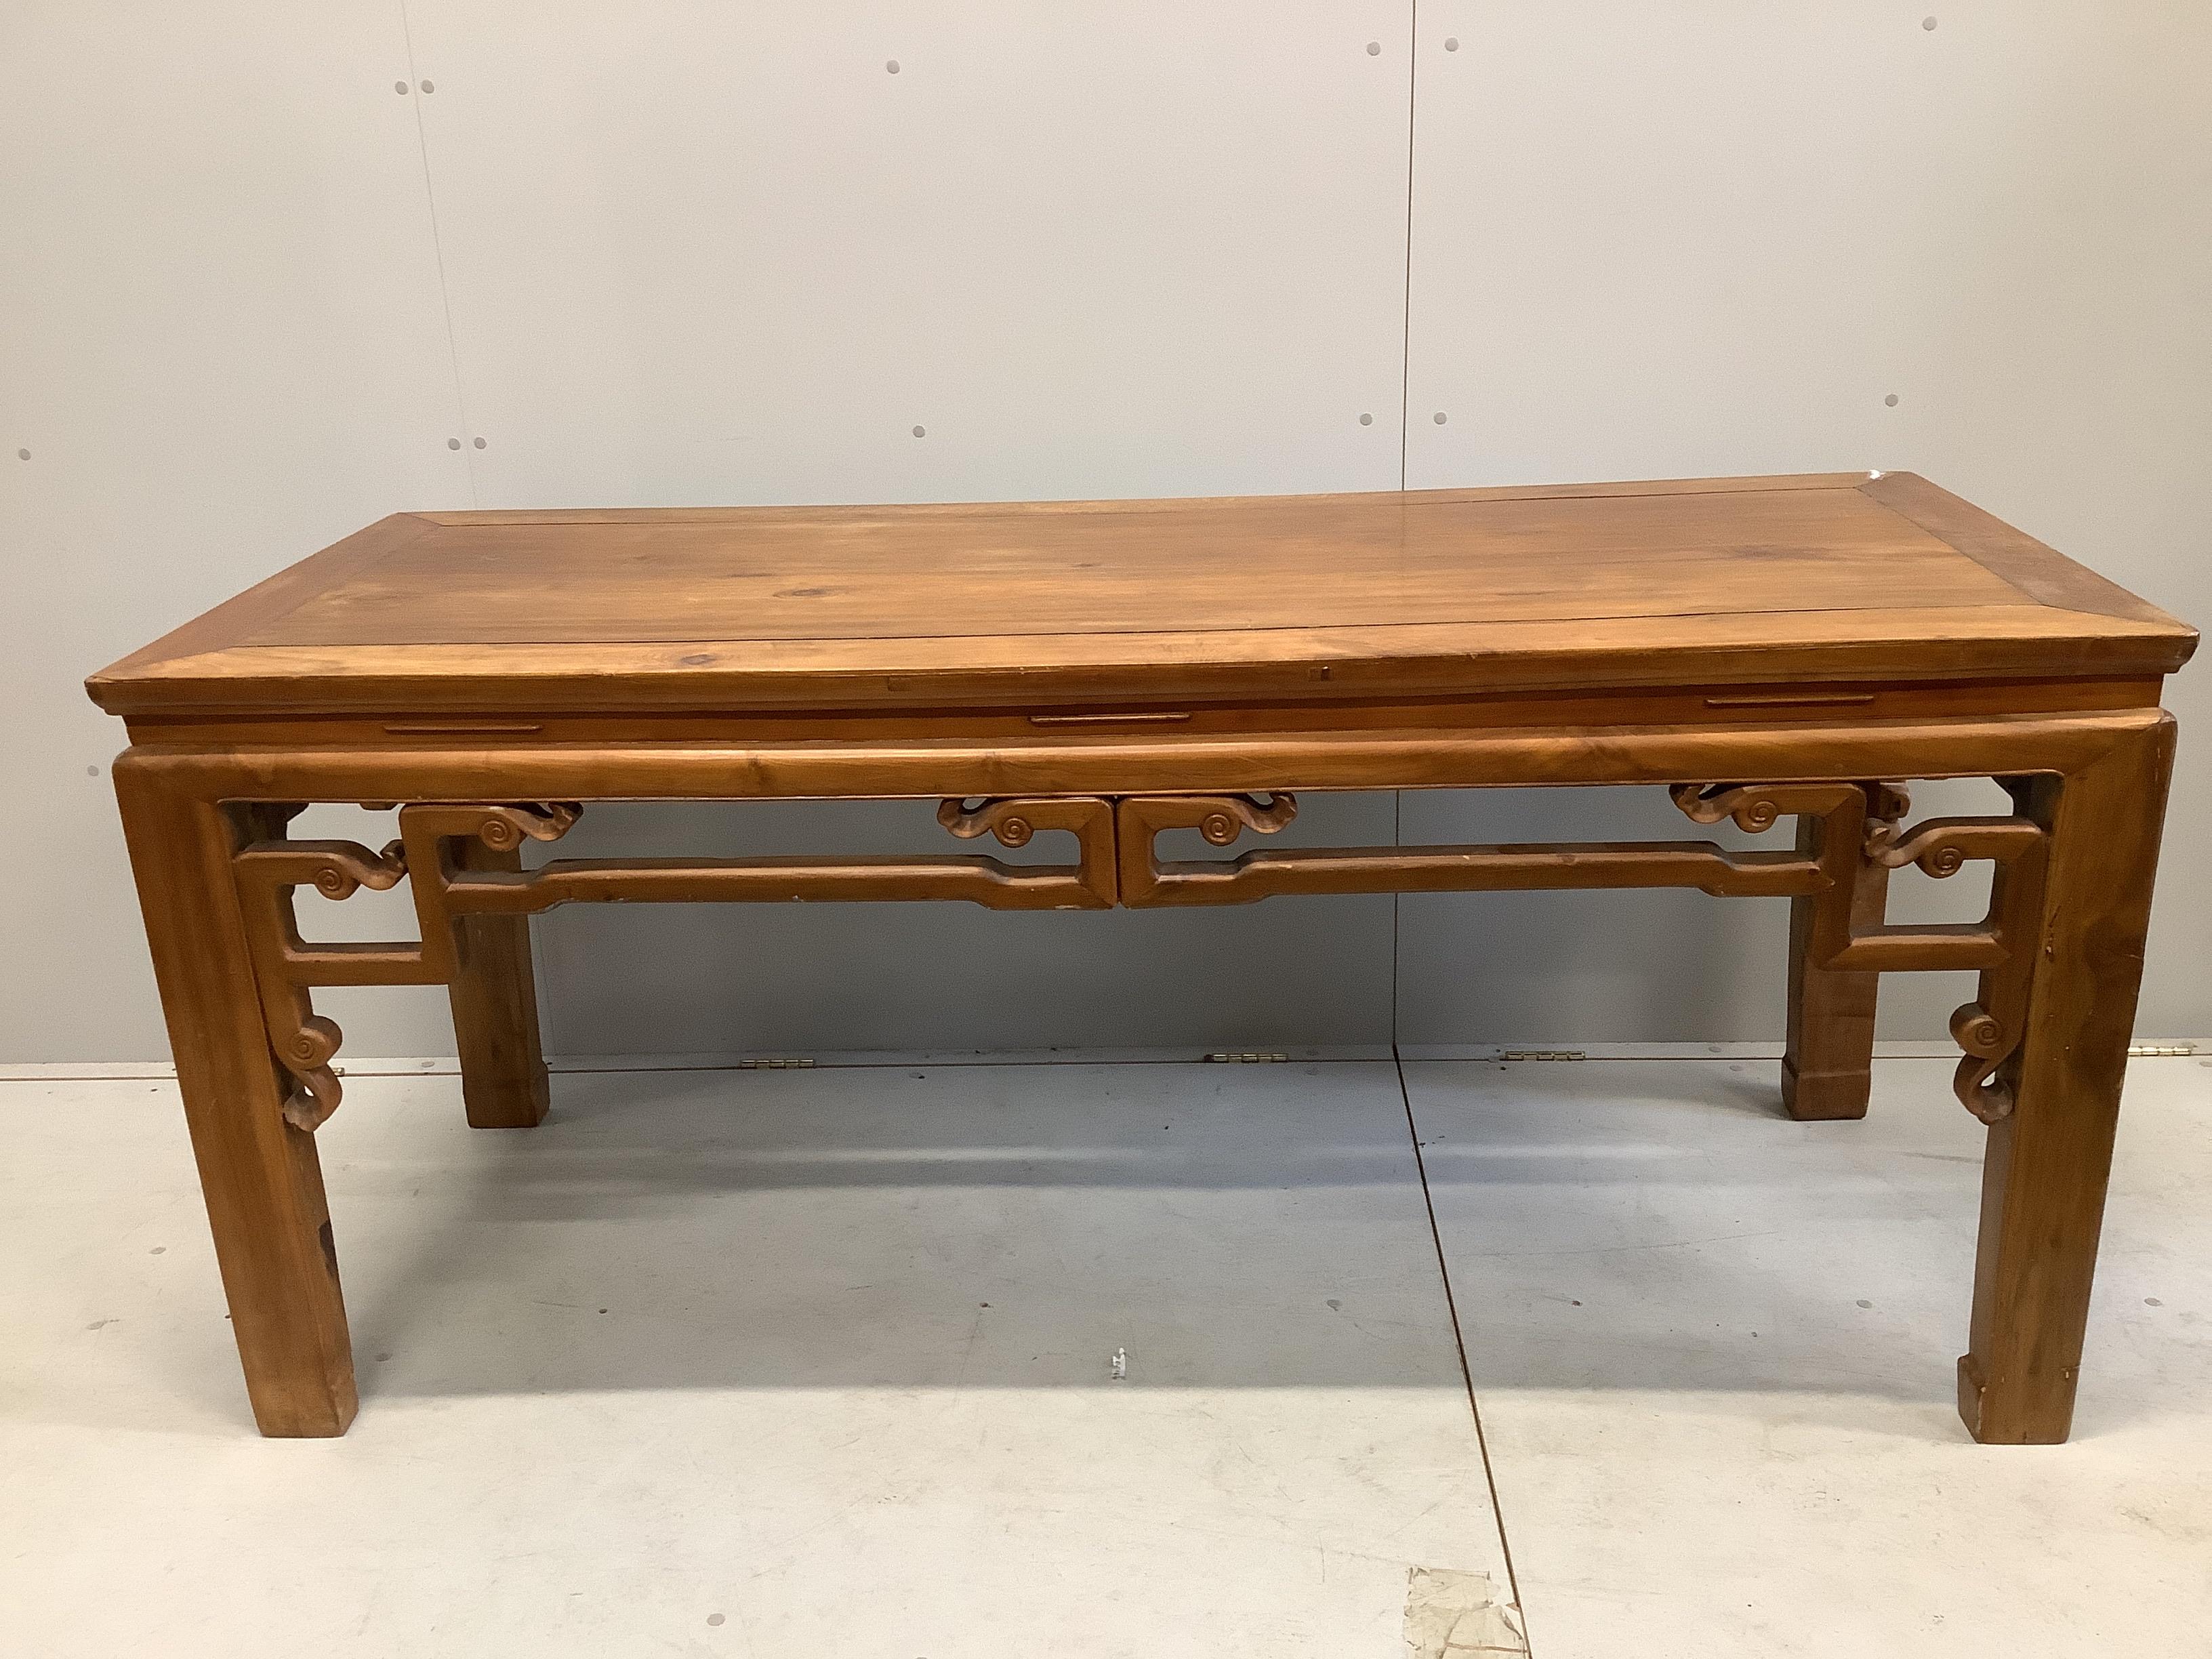 A Chinese carved hardwood altar or serving table, width 184cm, depth 75cm, height 83cm